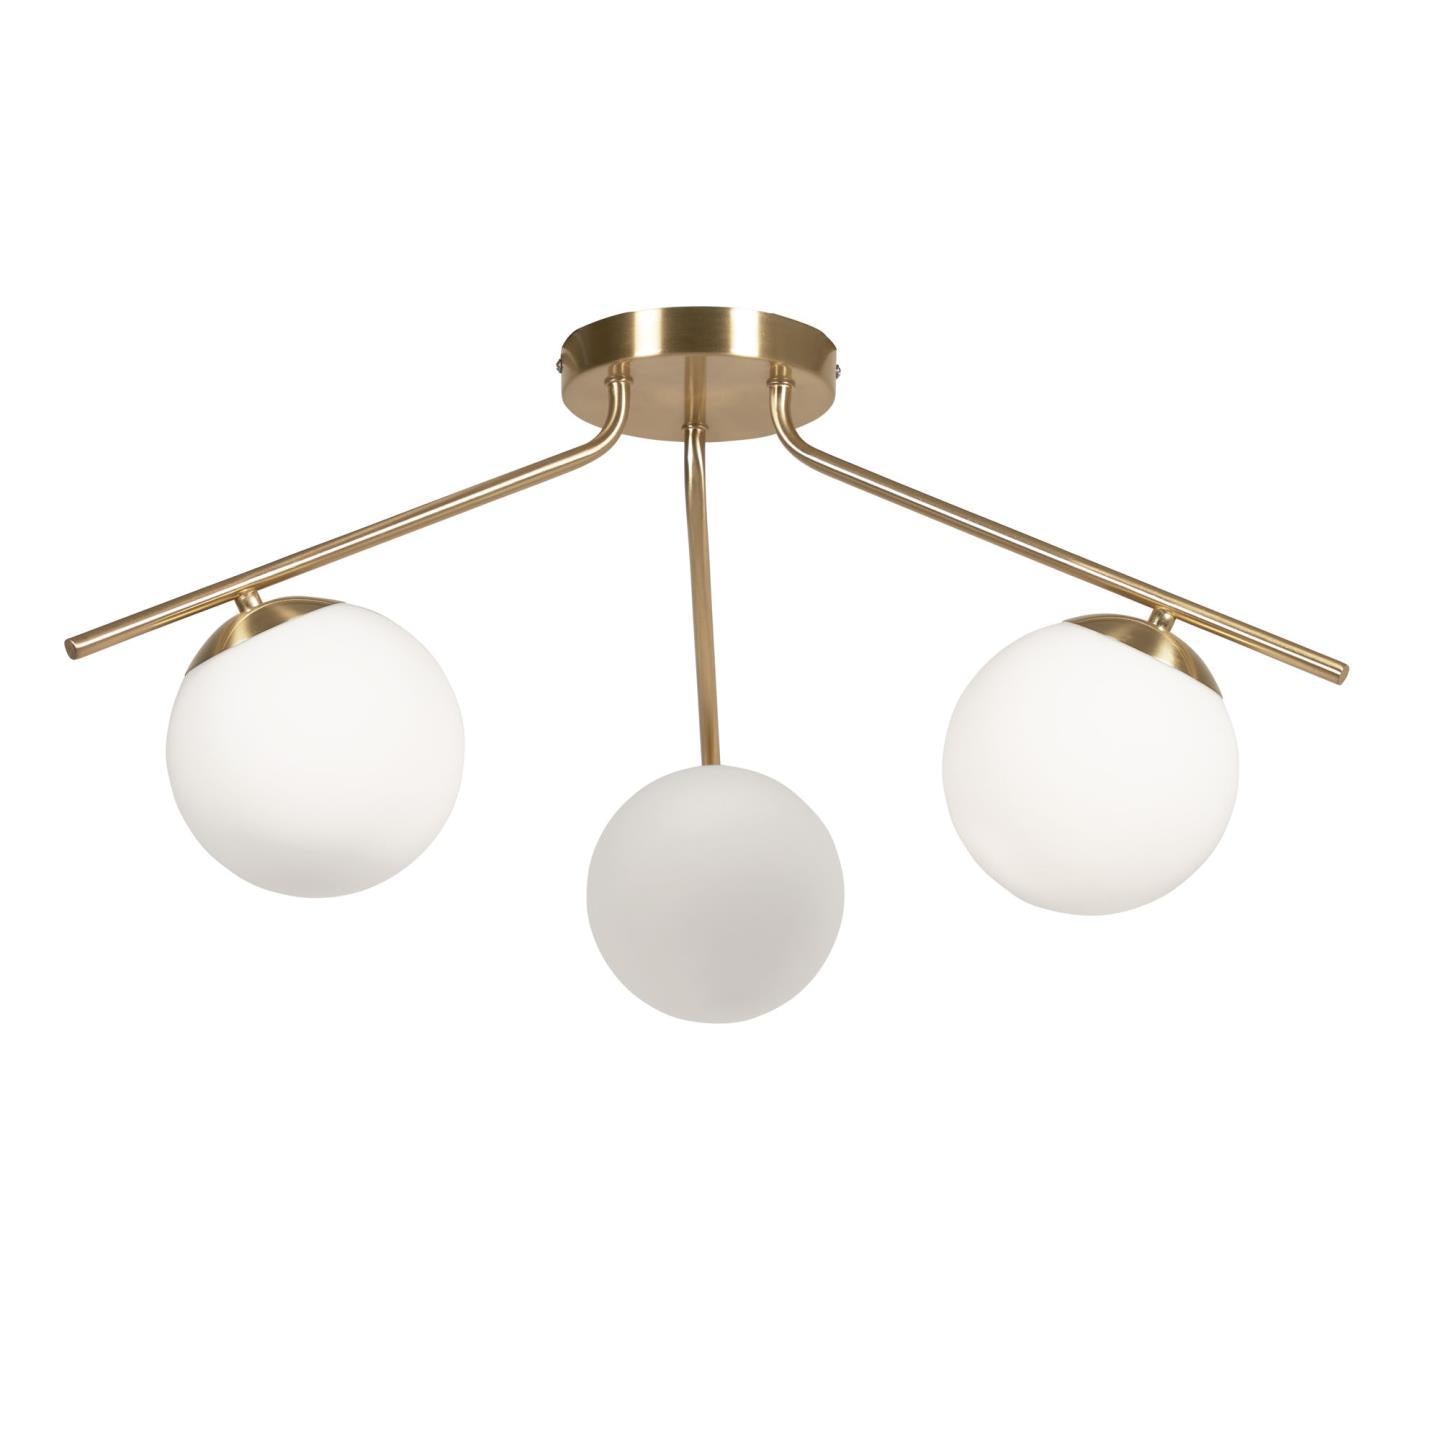 Mahala steel ceiling light with brass finish and three frosted glass spheres